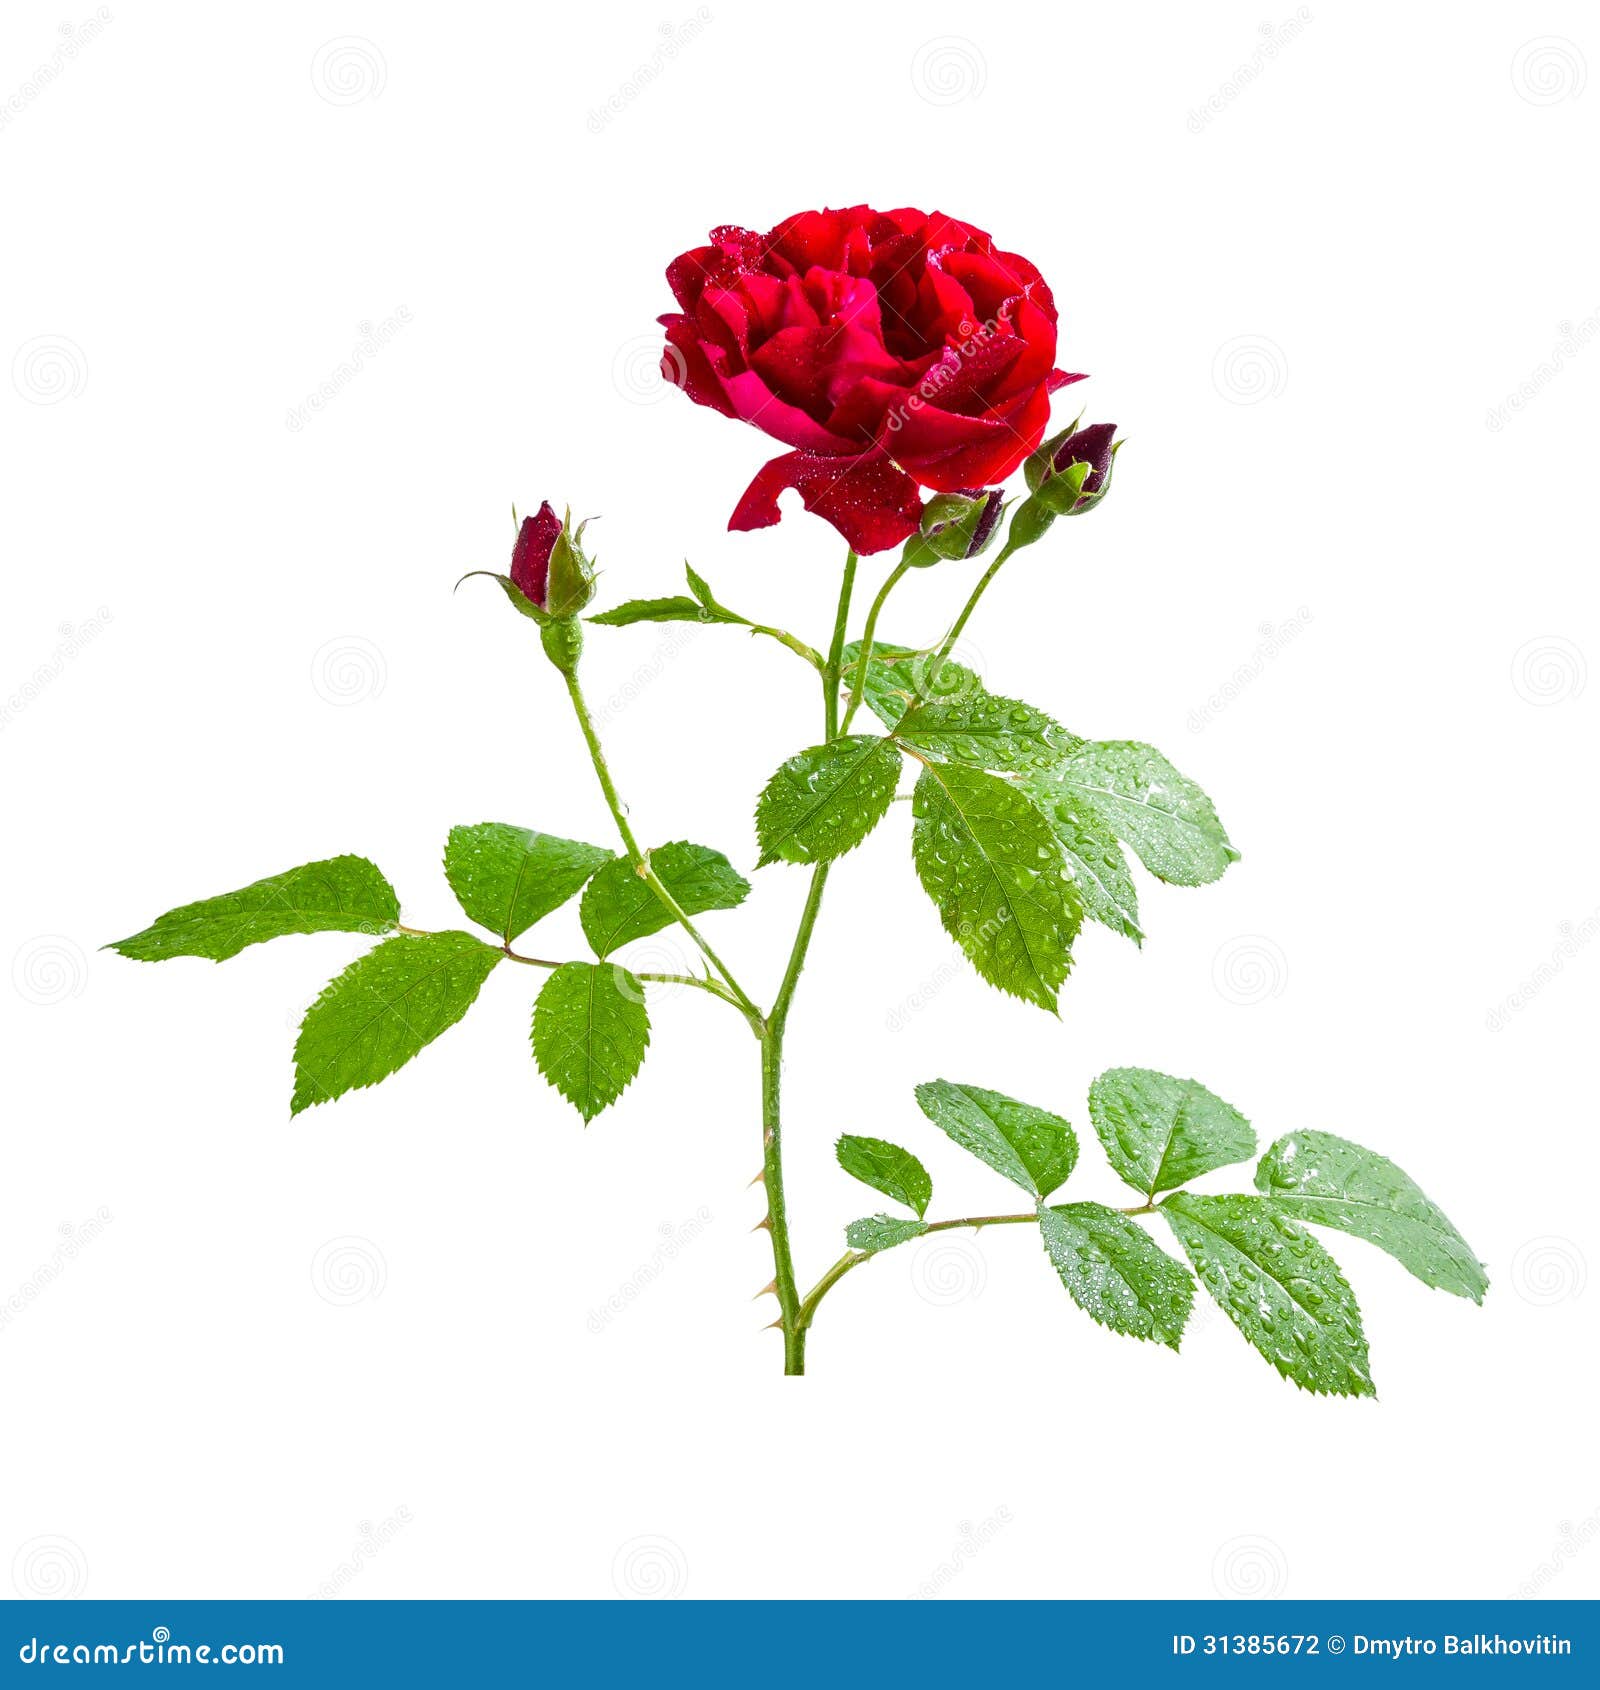 Red rose on branch stock photo. Image of shot, dogrose - 31385672